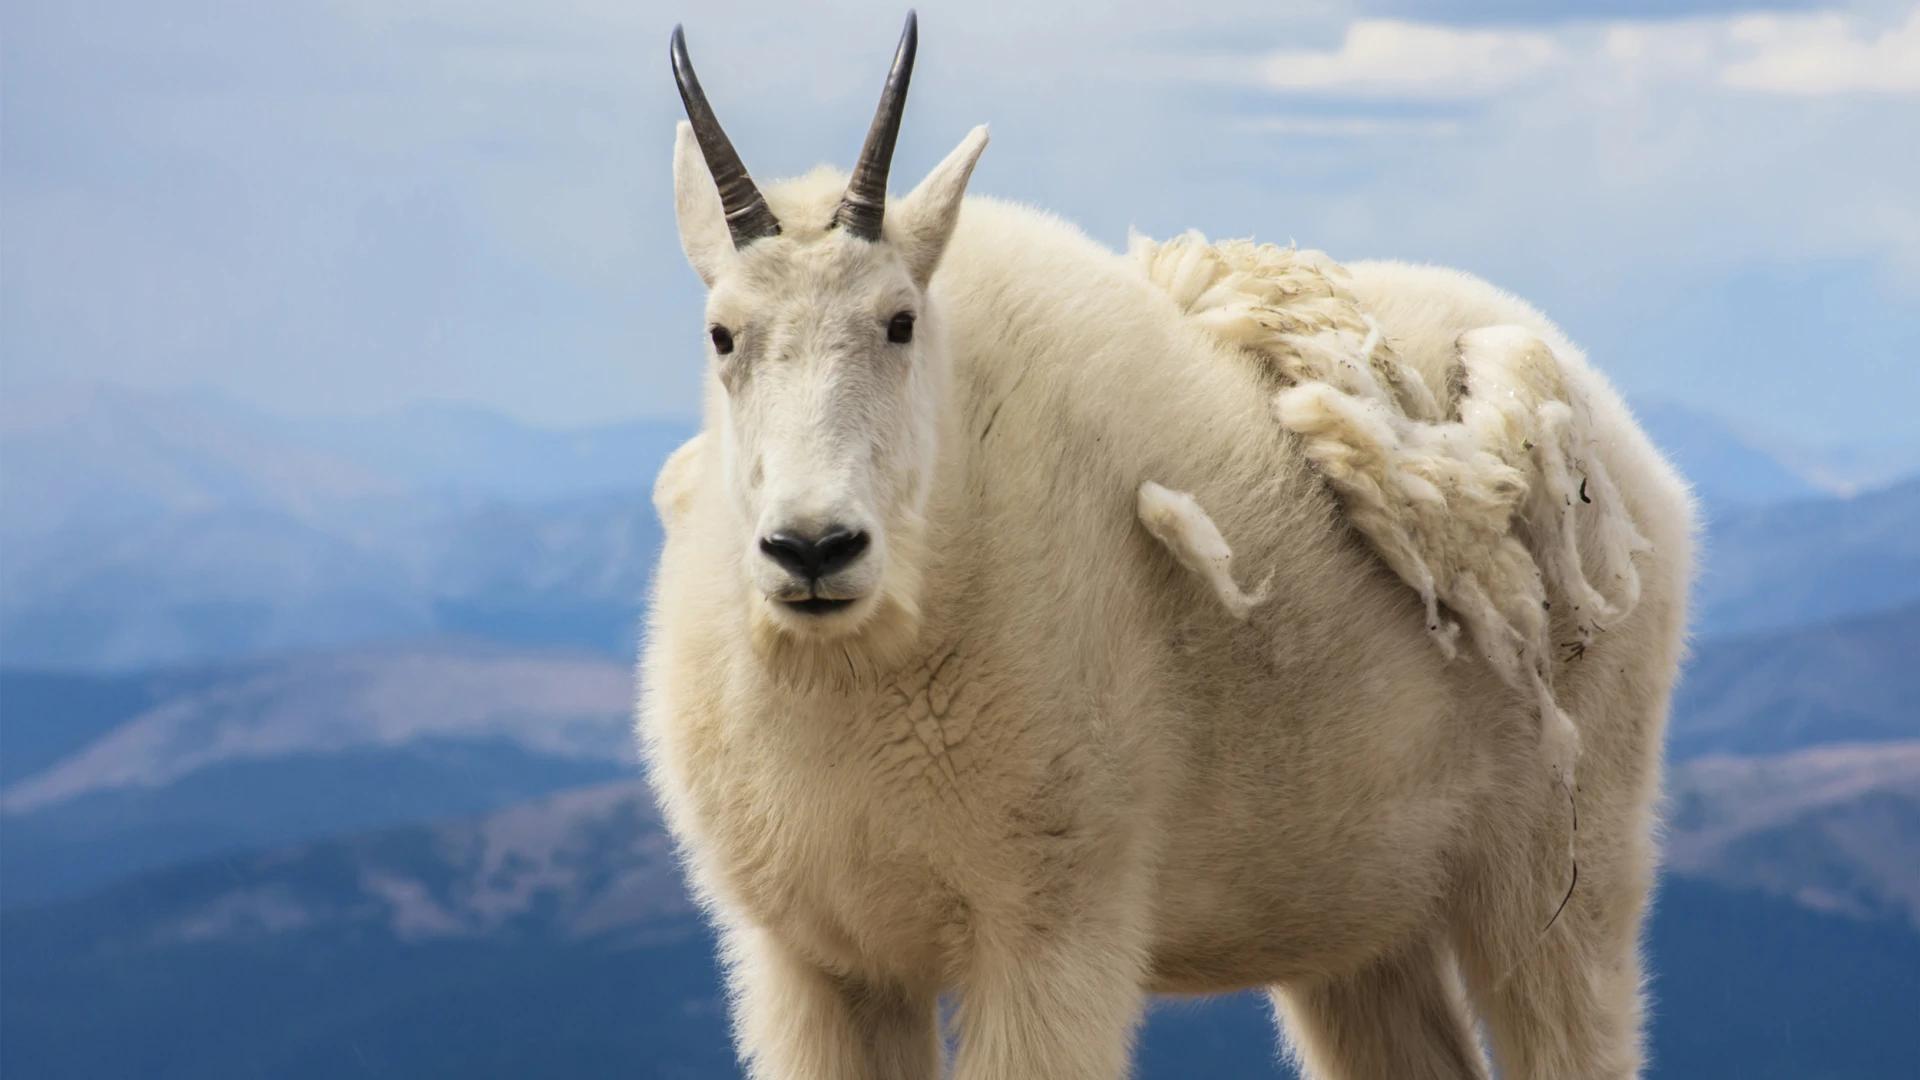 Grand Teton National Park’s Mountain goat cull continues